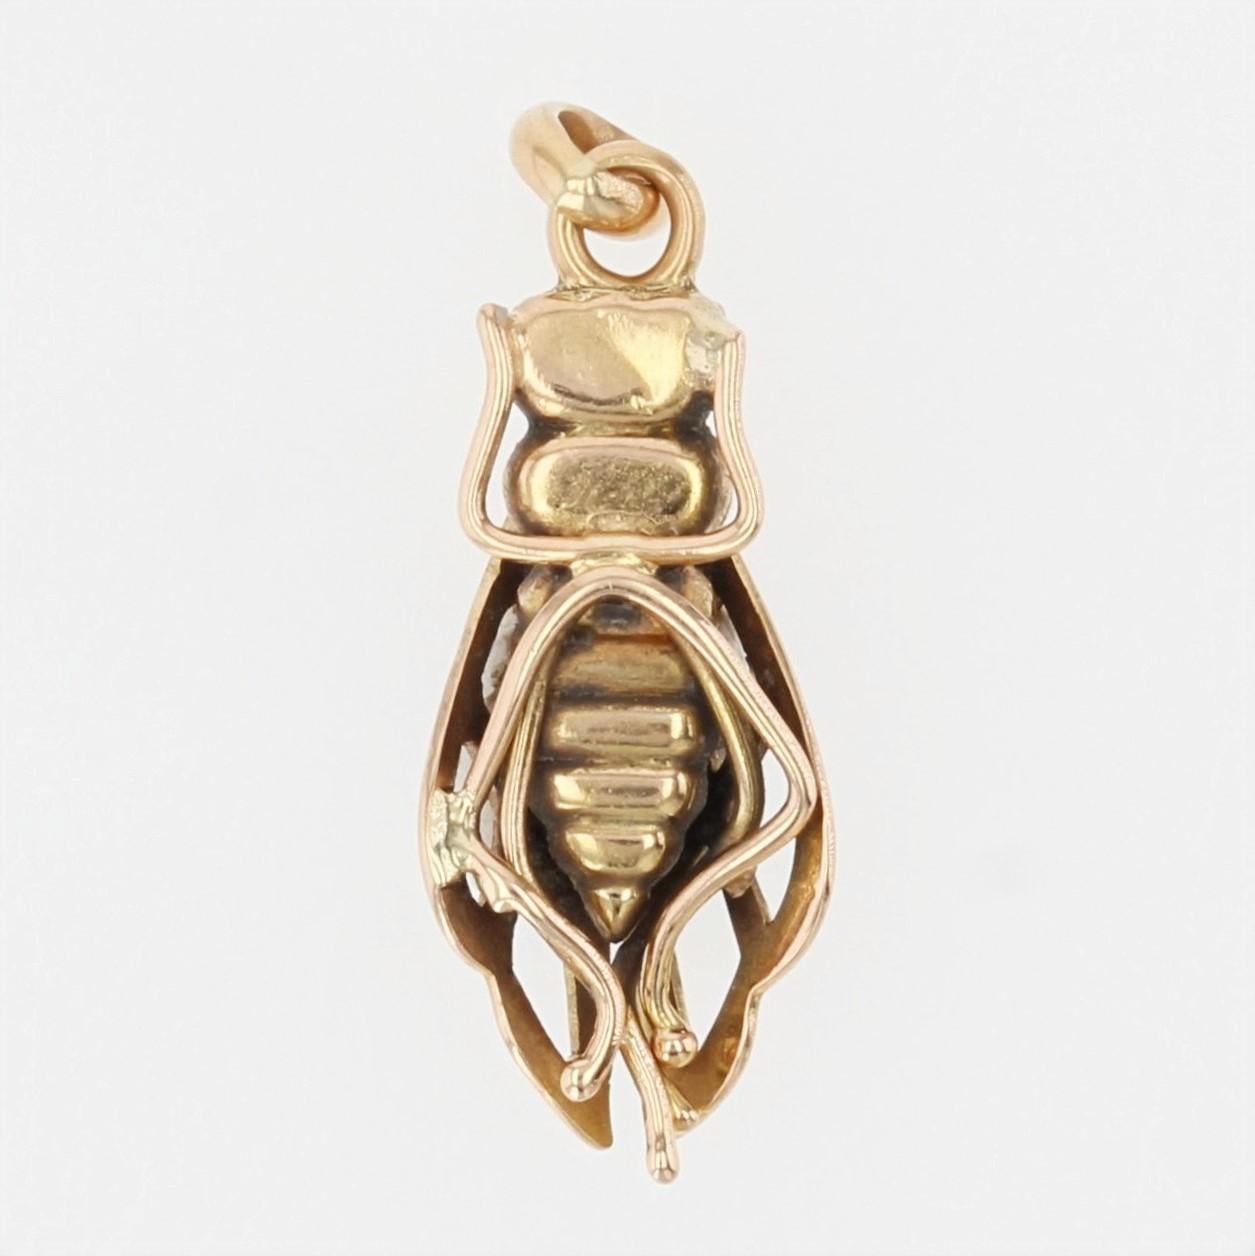 Pendant in 18 karat rose gold.
This retro pendant represents a cicada whose wings are openworked.
Pendant sold alone without its chain of presentation.
Height : 2,4 cm, width : 8,2 mm approximately, thickness : 4,5 mm approximately.
Total weight of